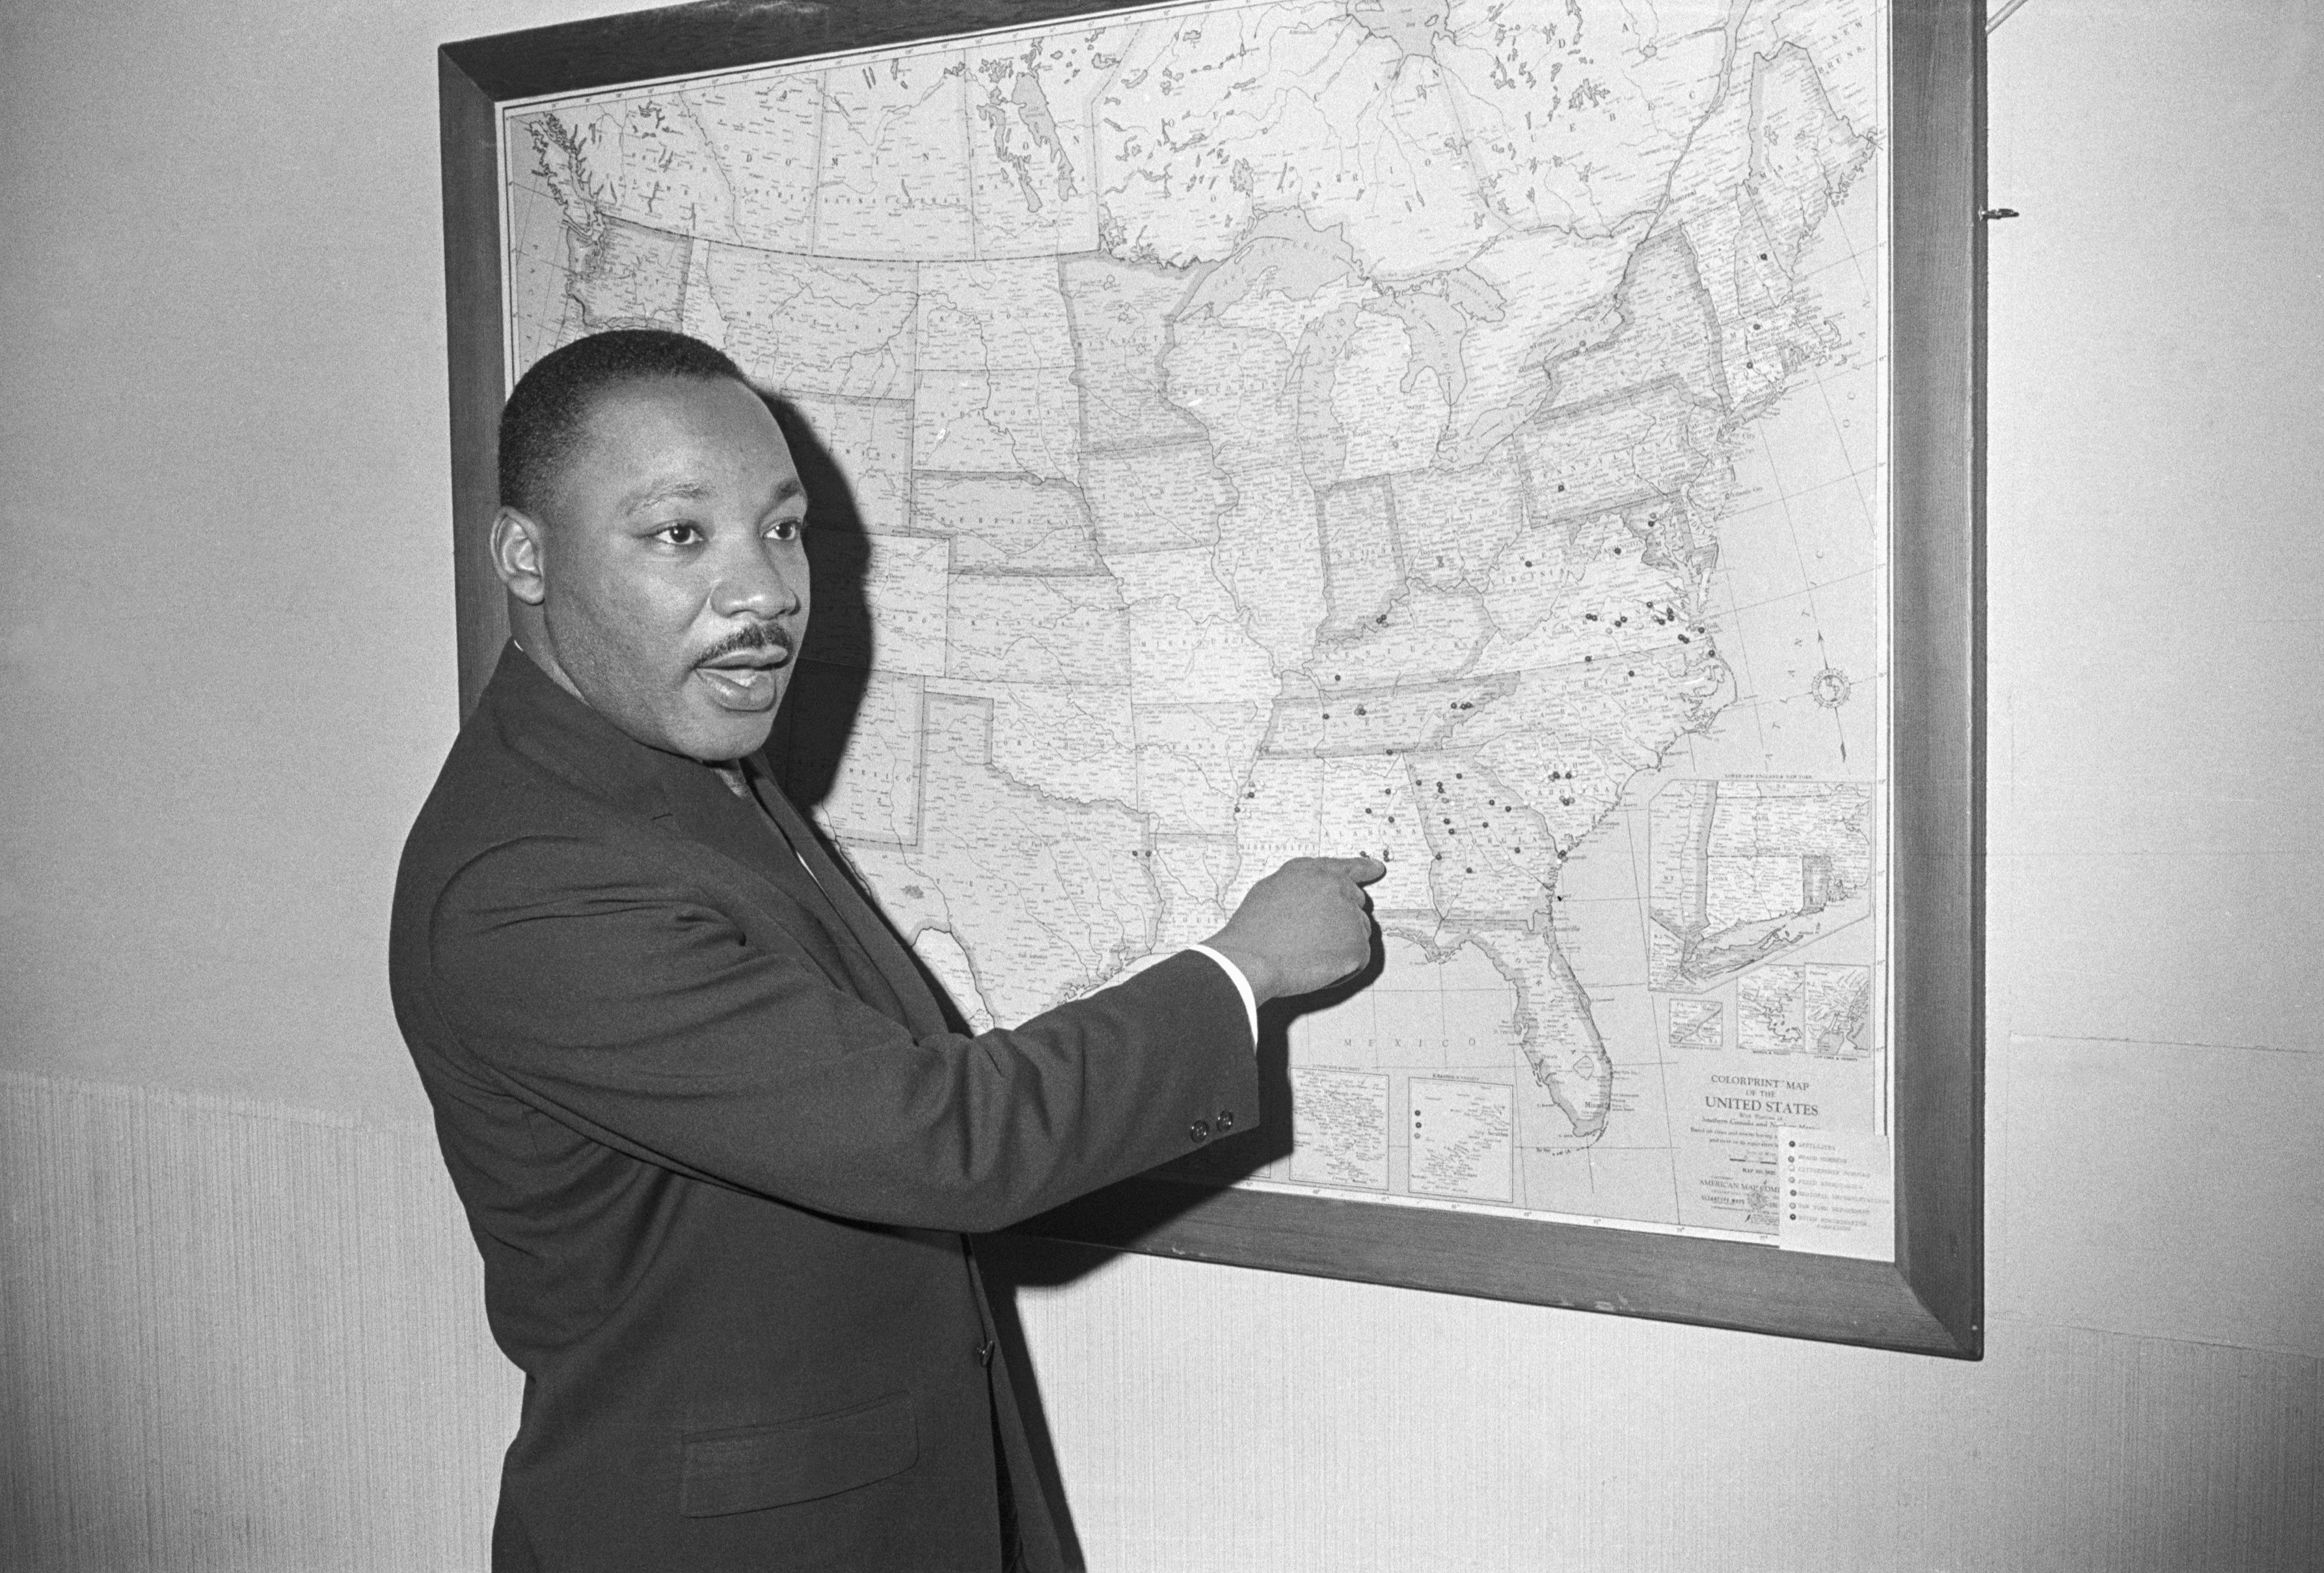 MLK points to a map